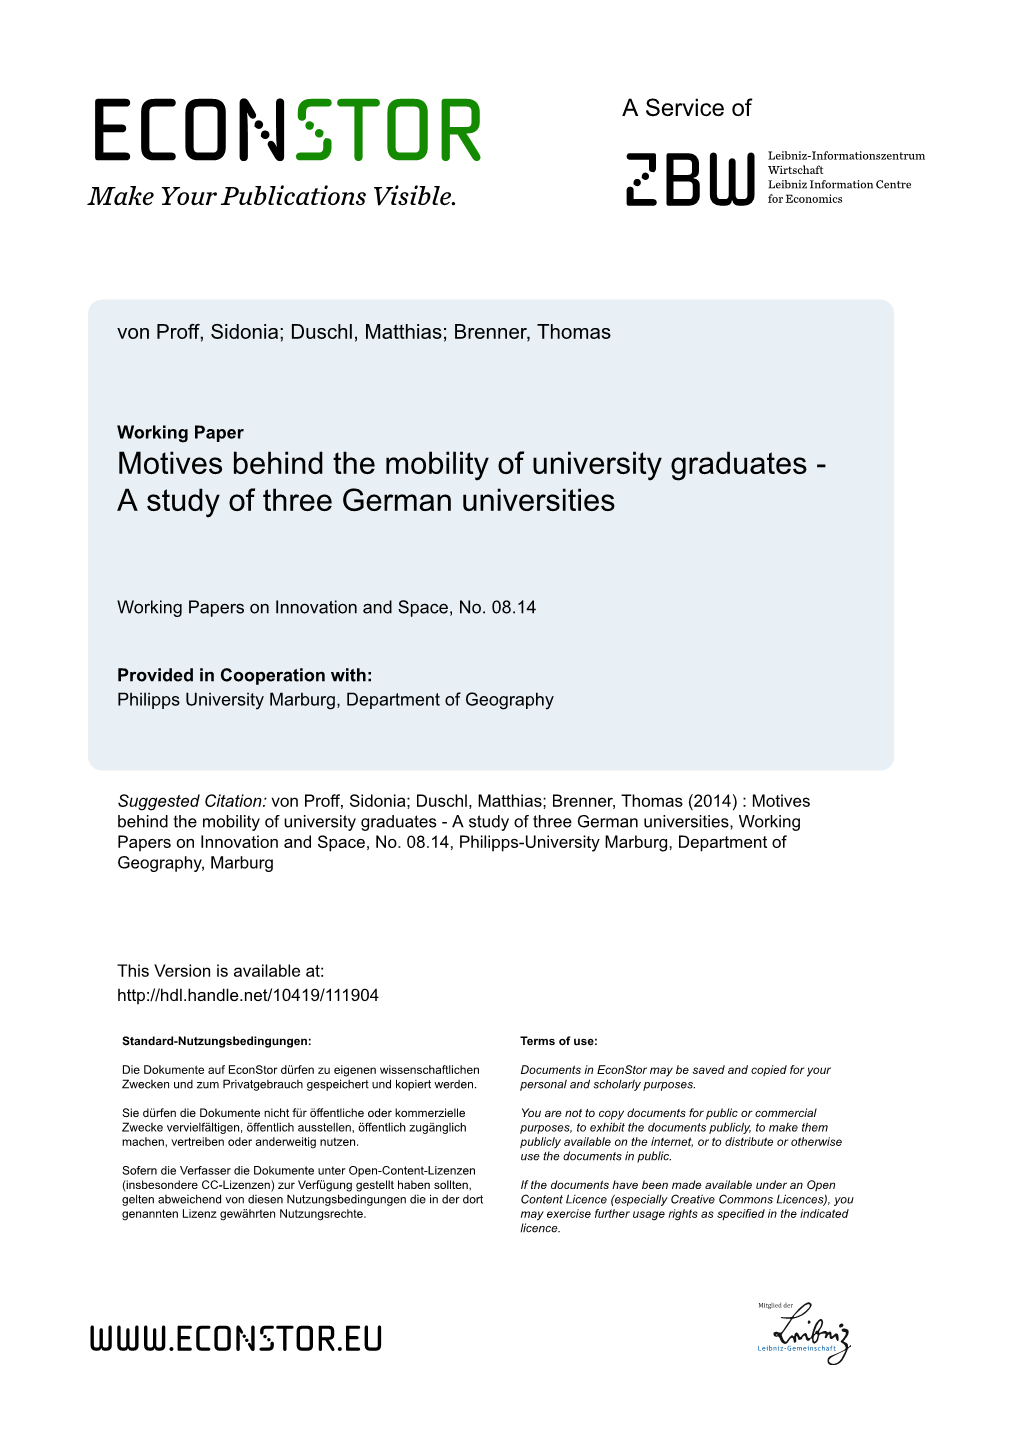 Motives Behind the Mobility of University Graduates - a Study of Three German Universities